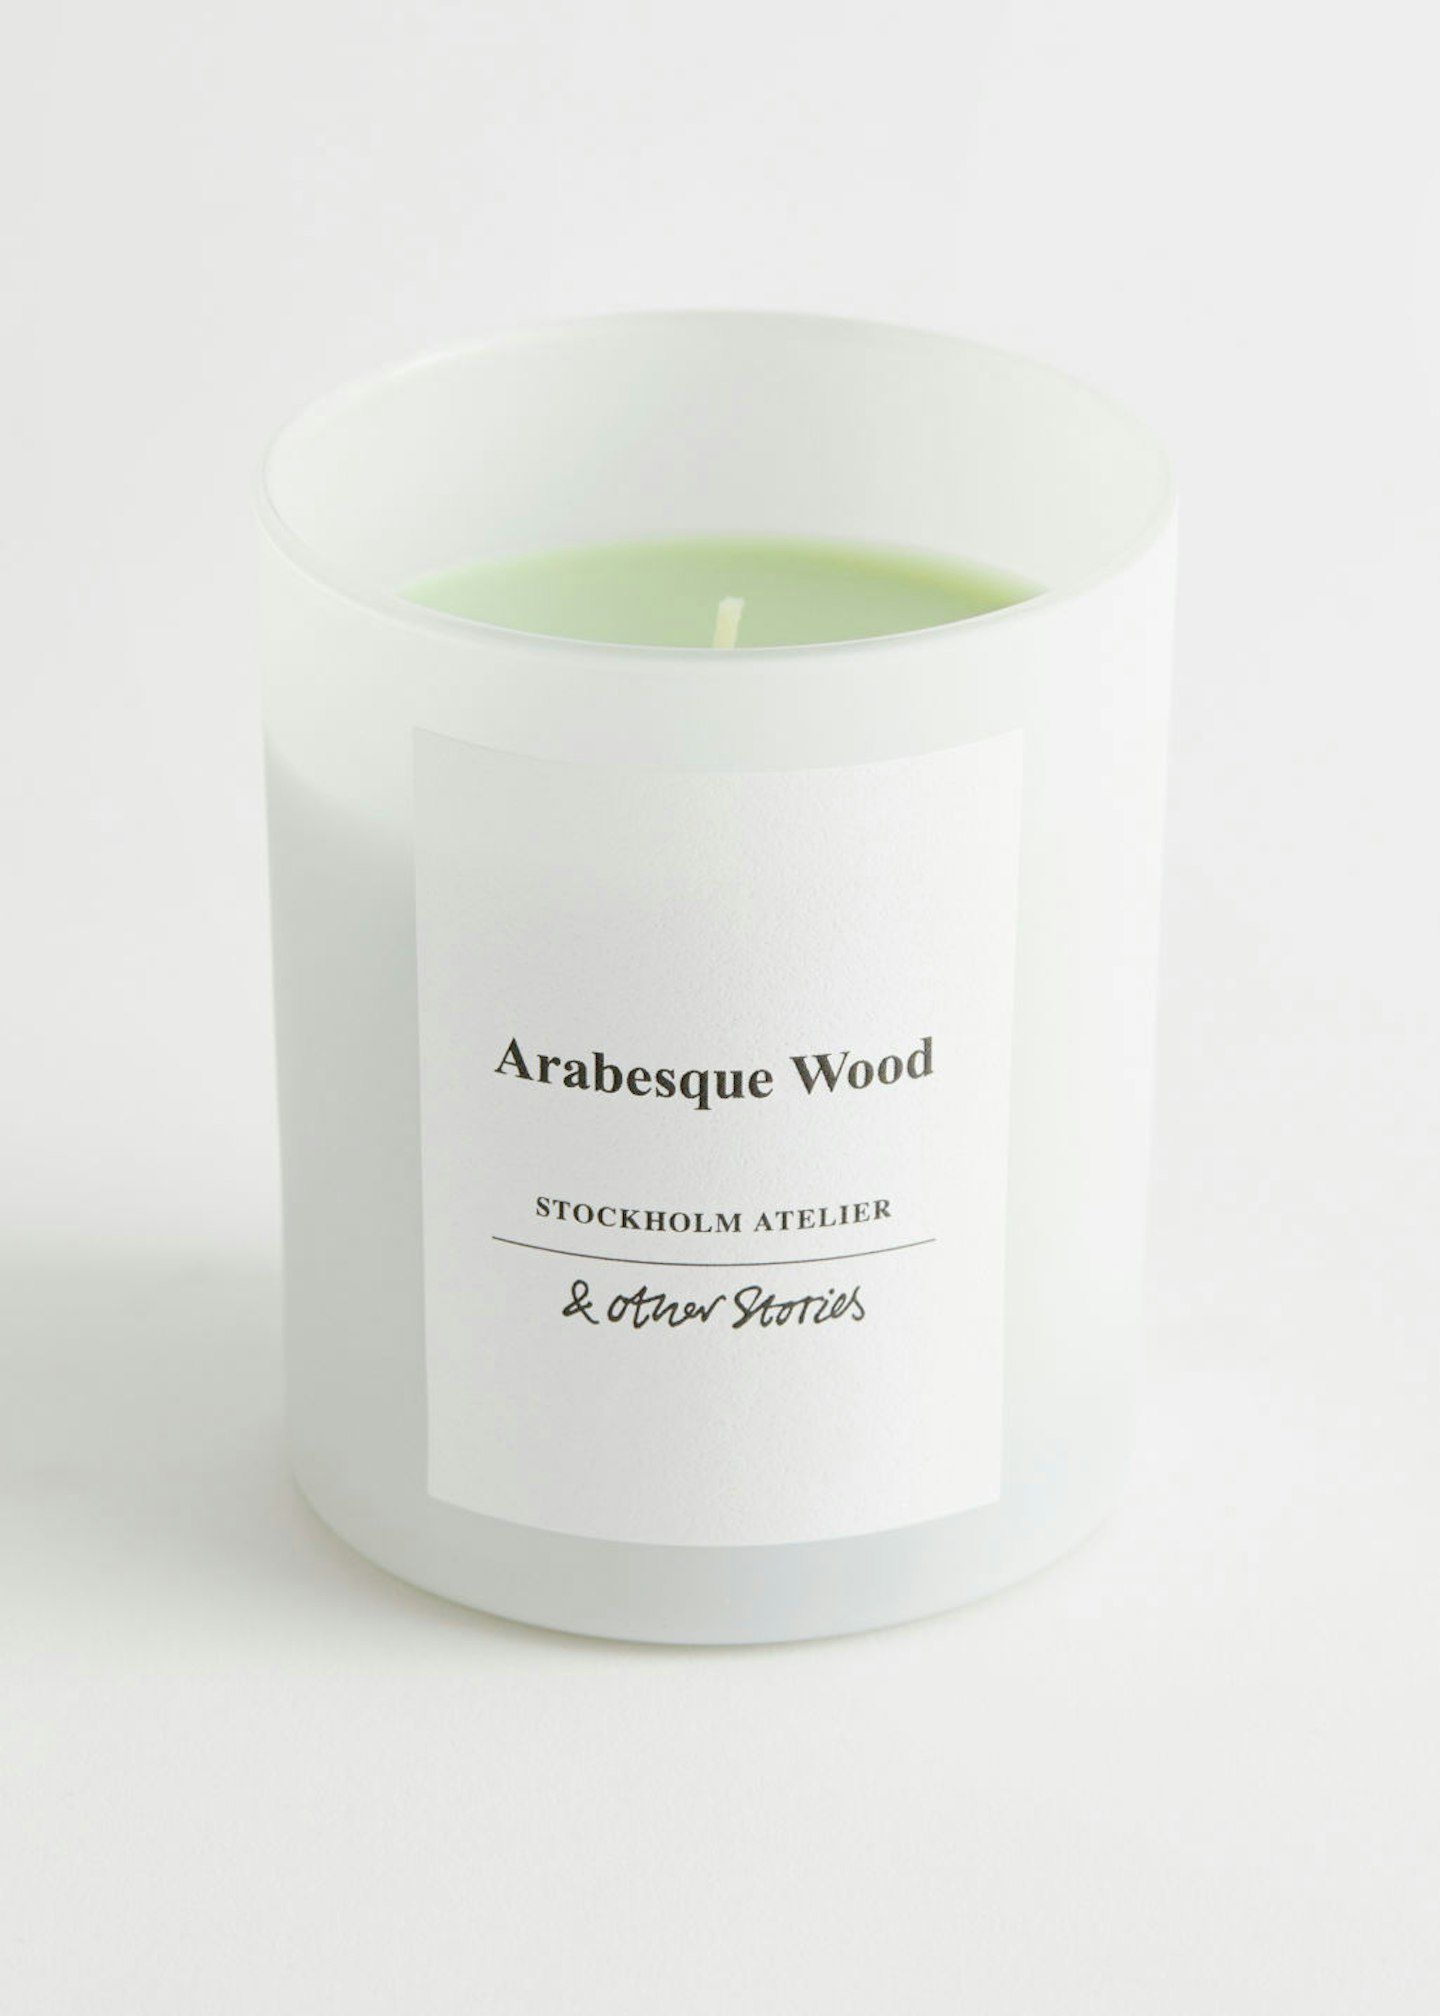 & Other Stories, Arabesque Wood Scented Candle, £17